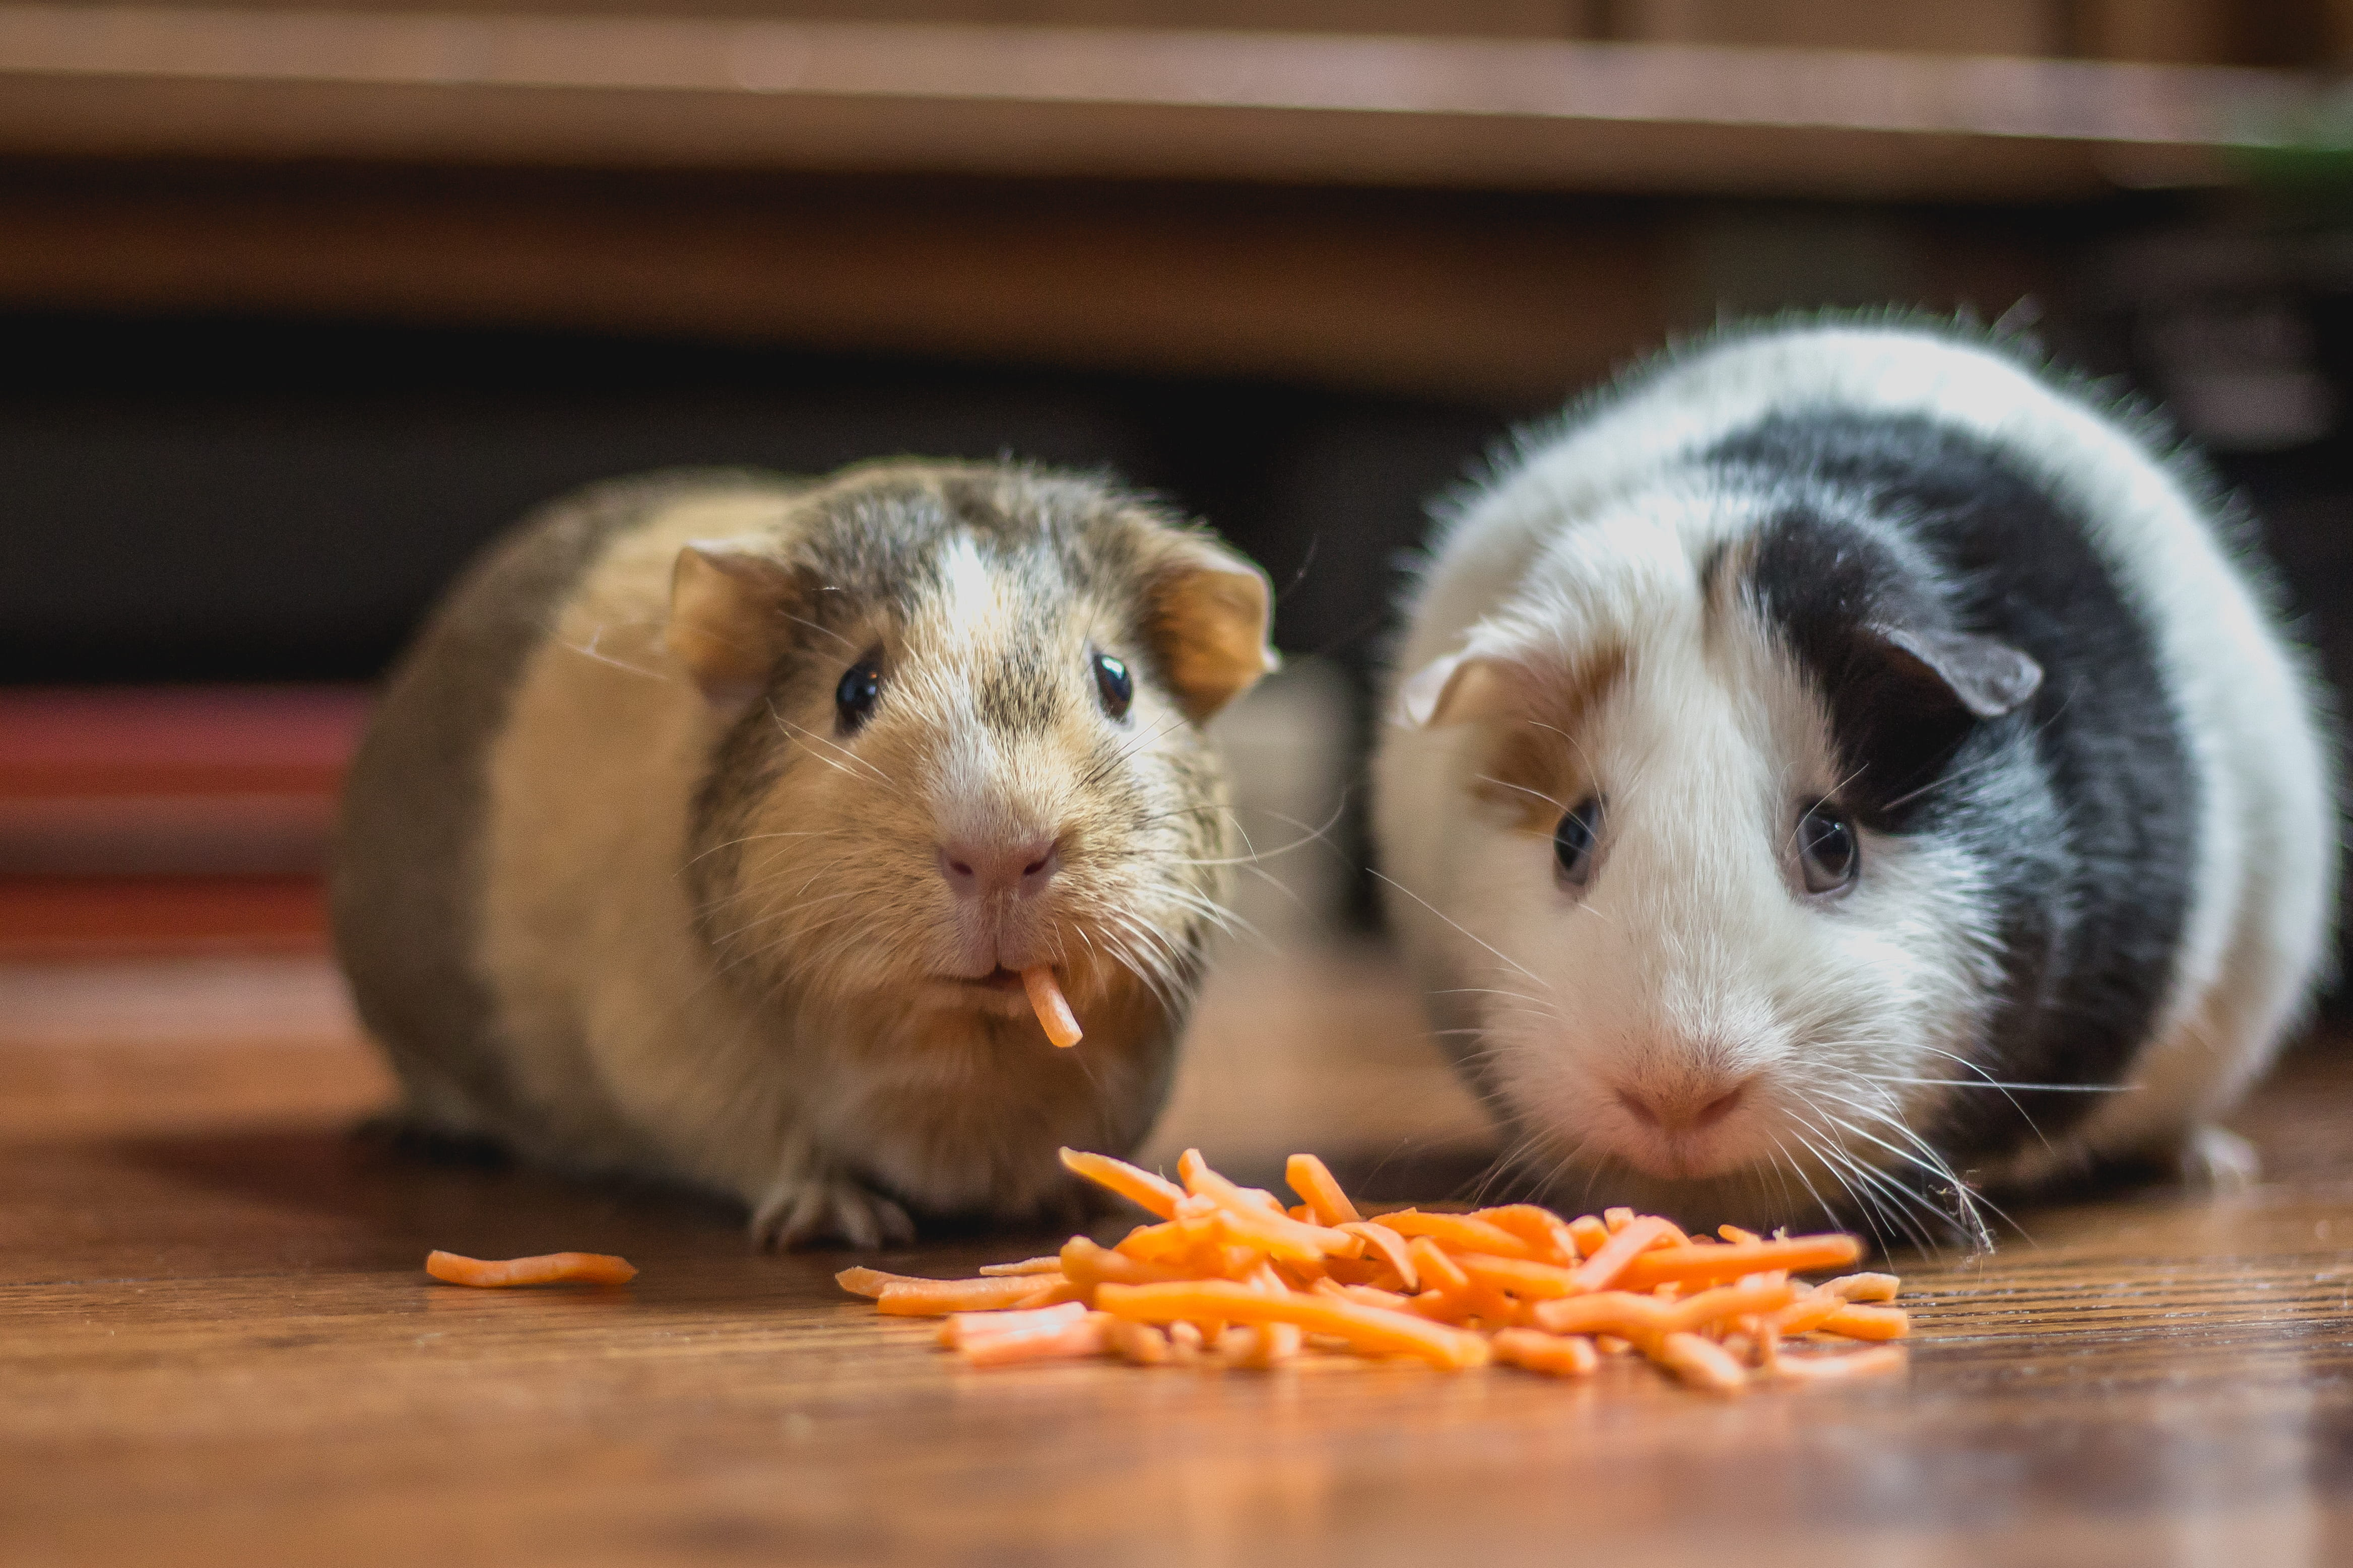 Wallpaper Two Guinea Pigs Eating Cheese, Plant, Guinea Pig, Animal